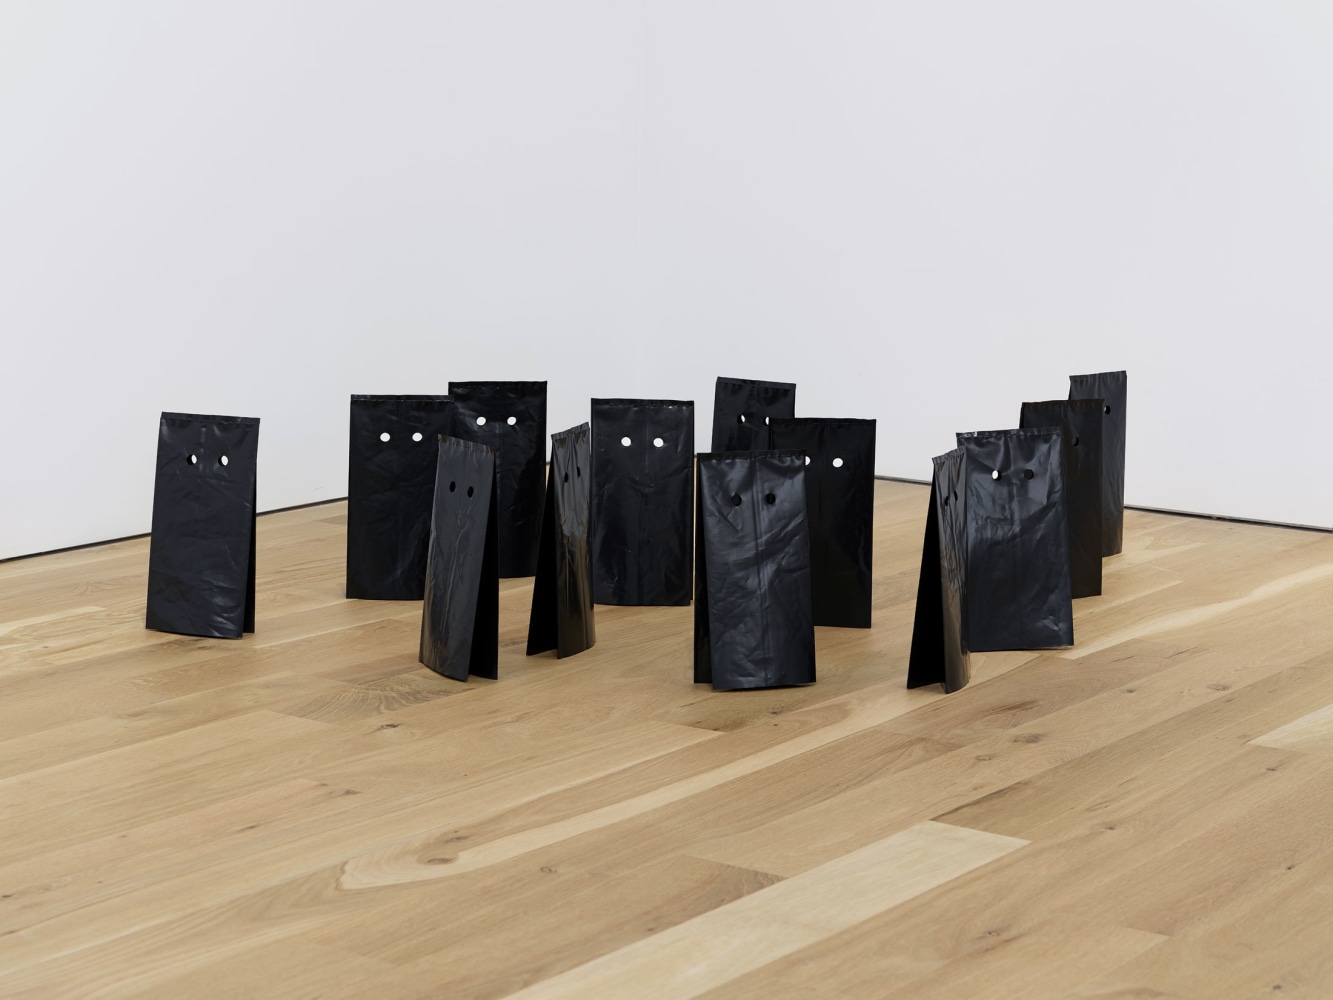 Lucia Nogueira
Mask, 1986
Polythene, 13 parts
Each: 9 5/8 x 4 3/4 x 2 3/8 inches (24.5 x 11.9 x 6 cm)
Installation dimensions variable